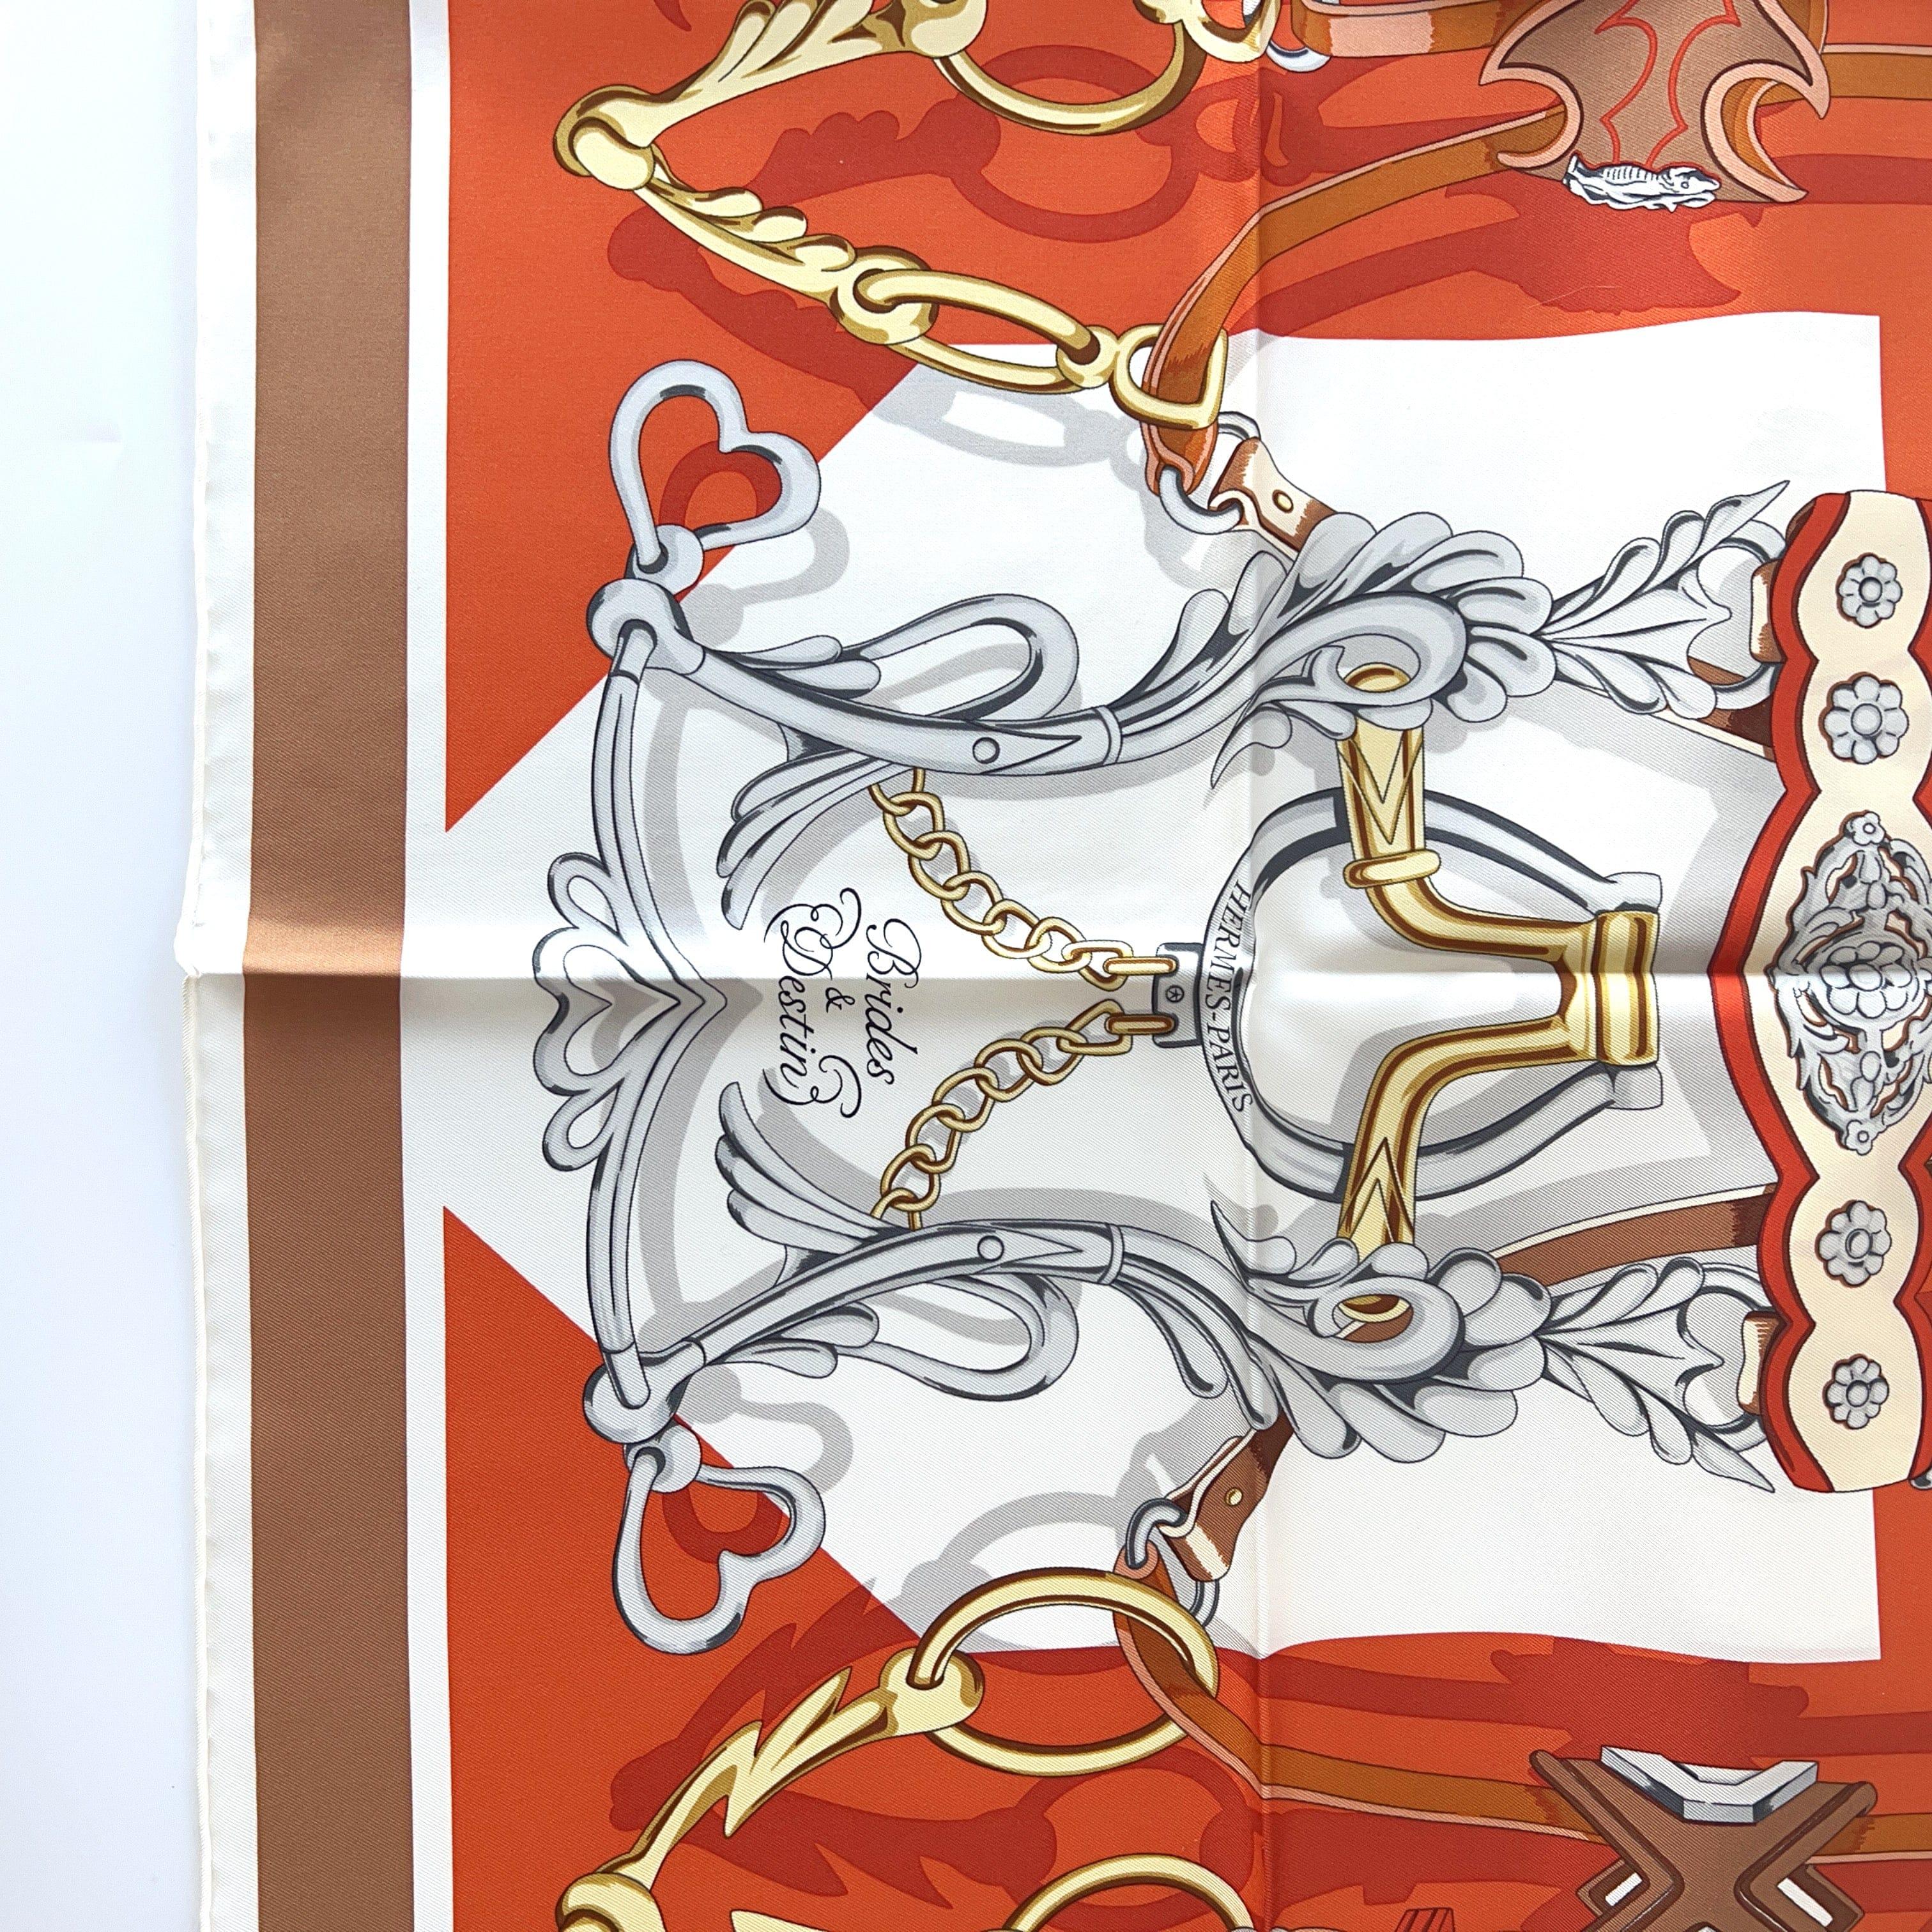 Shop this Hermes Brides et Destin Scarf in Orange Cuit, Beige Doré and Blanc. The Brides et Destin Scarf is designed by Daiske Nomura featuring the three sisters from Greek mythology. The scarf is full of fun designs and creativity, with both